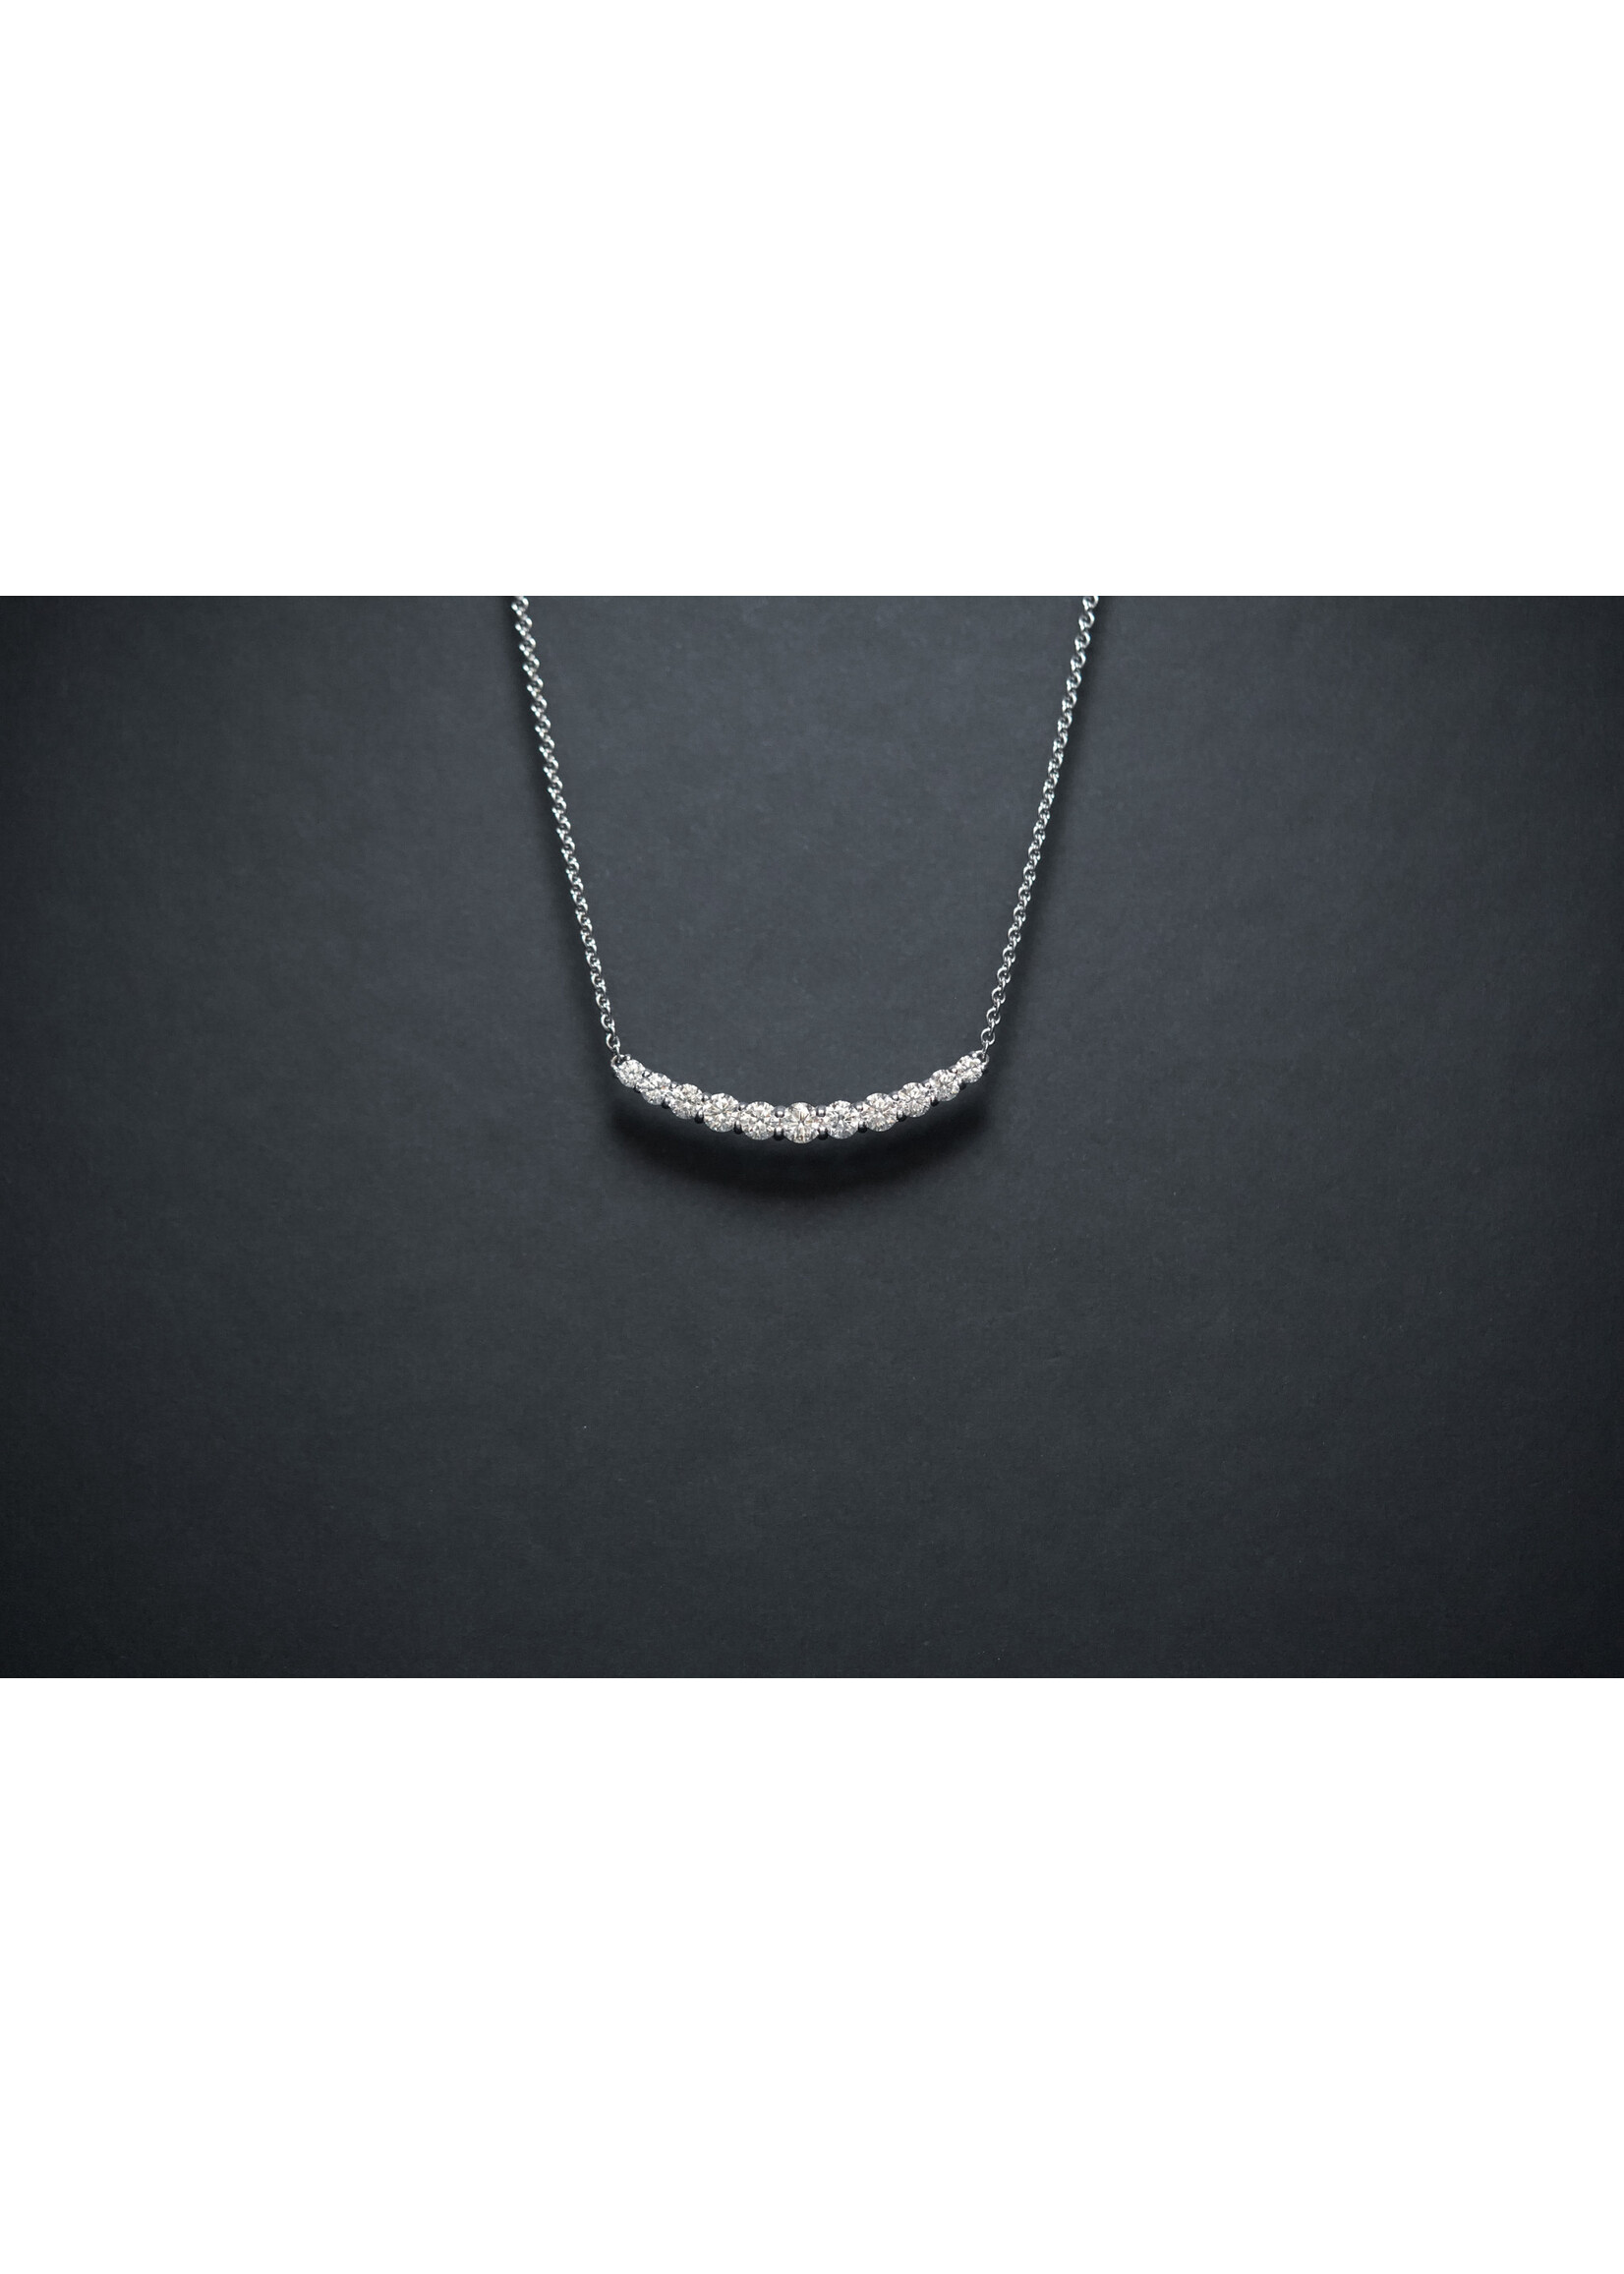 14KW 6.8g 2.00ctw Curved Diamond Bar Necklace 18"